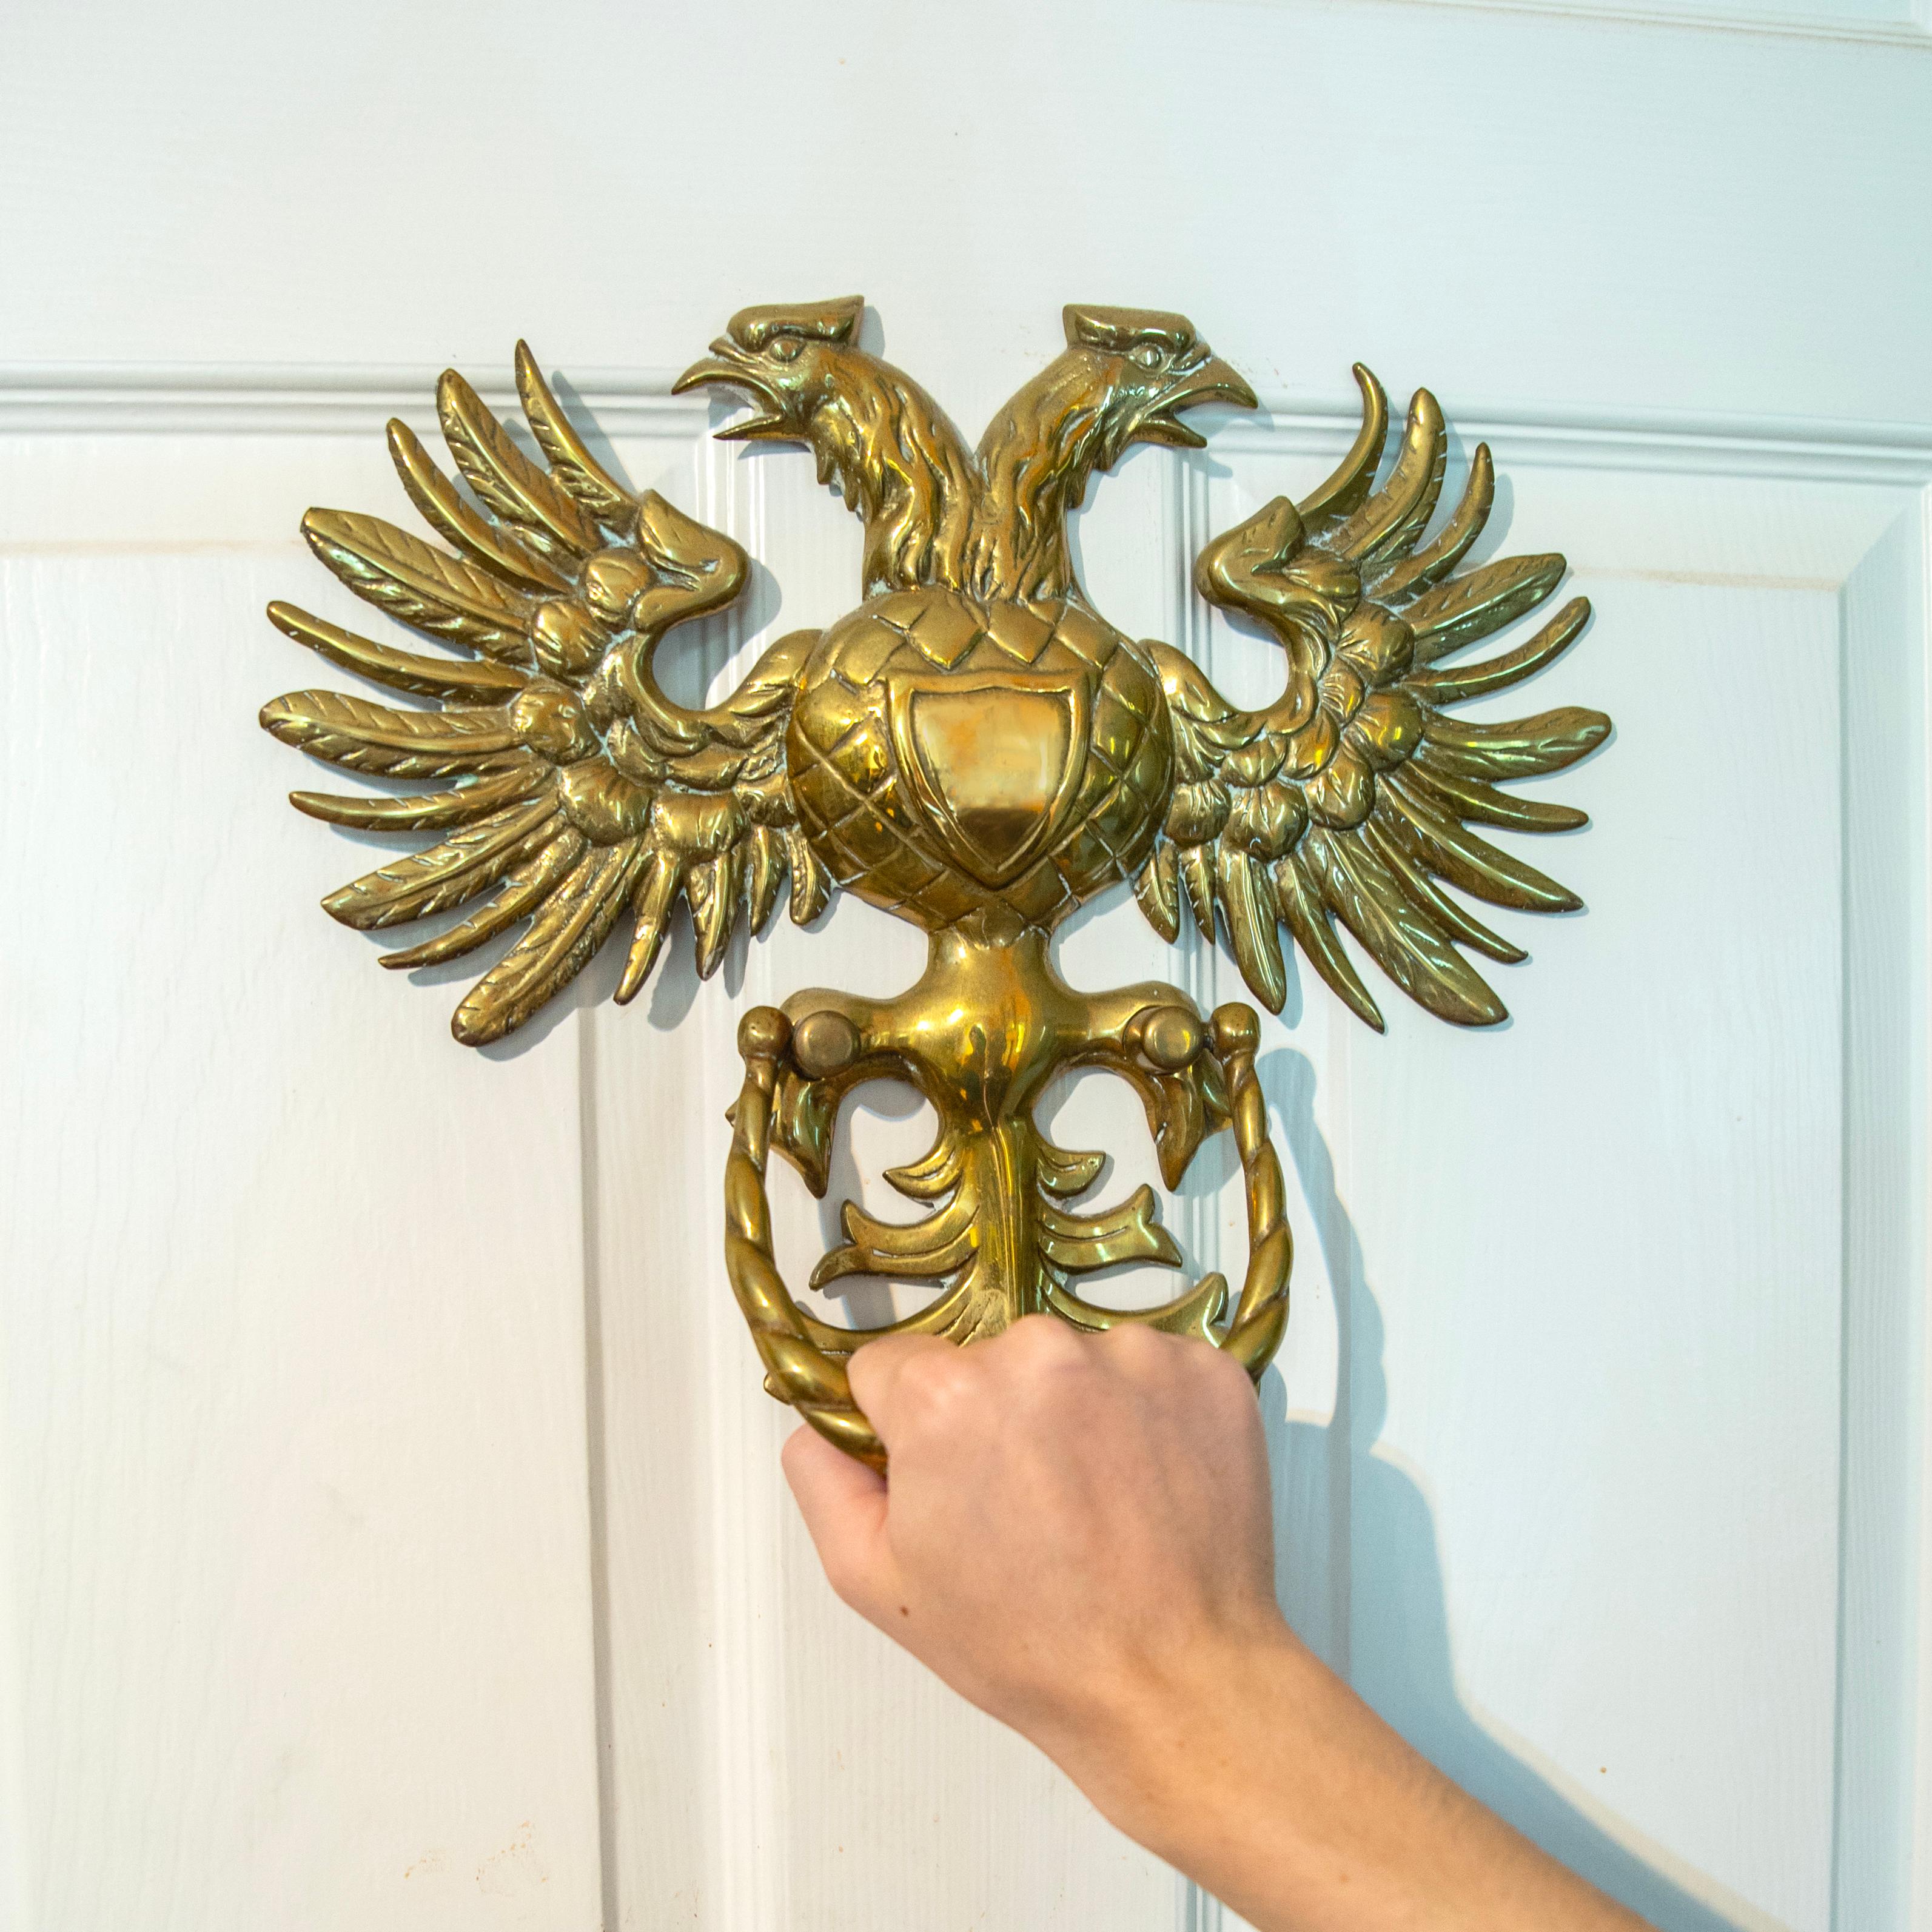 Designed as a stylized repoussé double headed eagle fashioned entirely of brass, detailing textured feathers, the wings and tail dramatically splayed, enclosing a polished blank shield, the swing handle large enough to accommodate the width of a